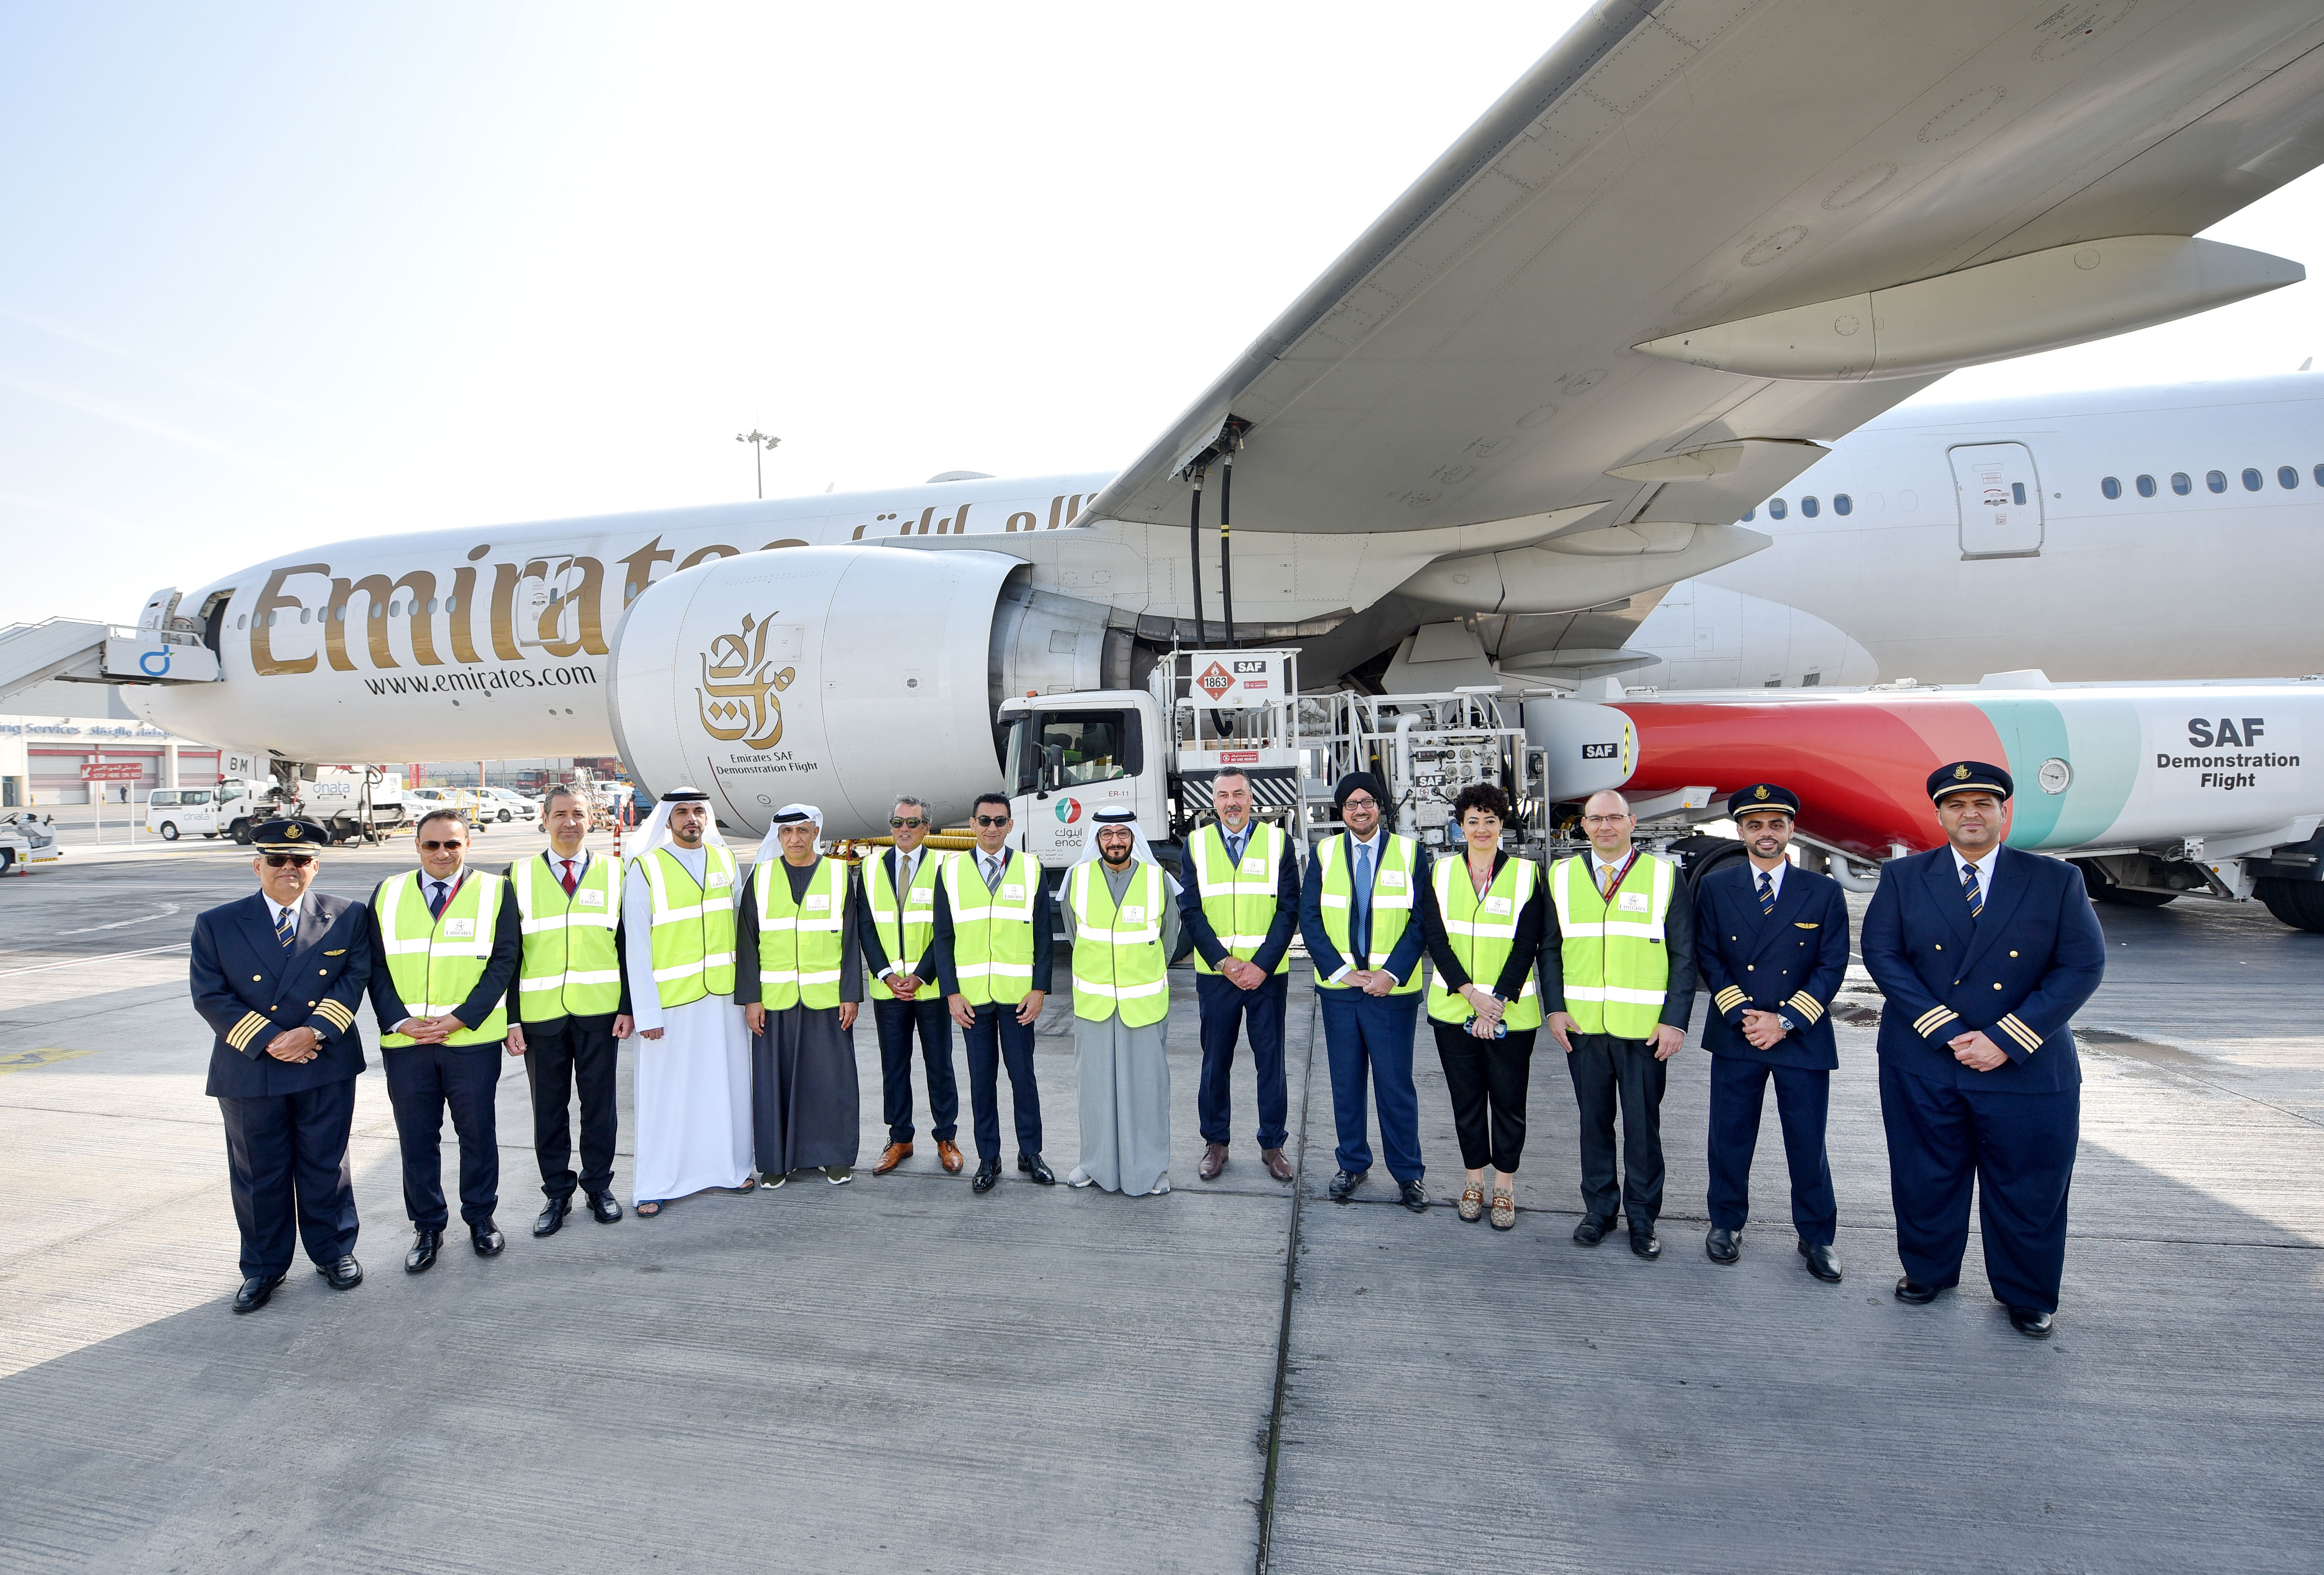 Emirates Operates Demonstration Flight Using 100% Sustainable Aviation Fuel | MORE THAN FLY | News - Aviation - Photos